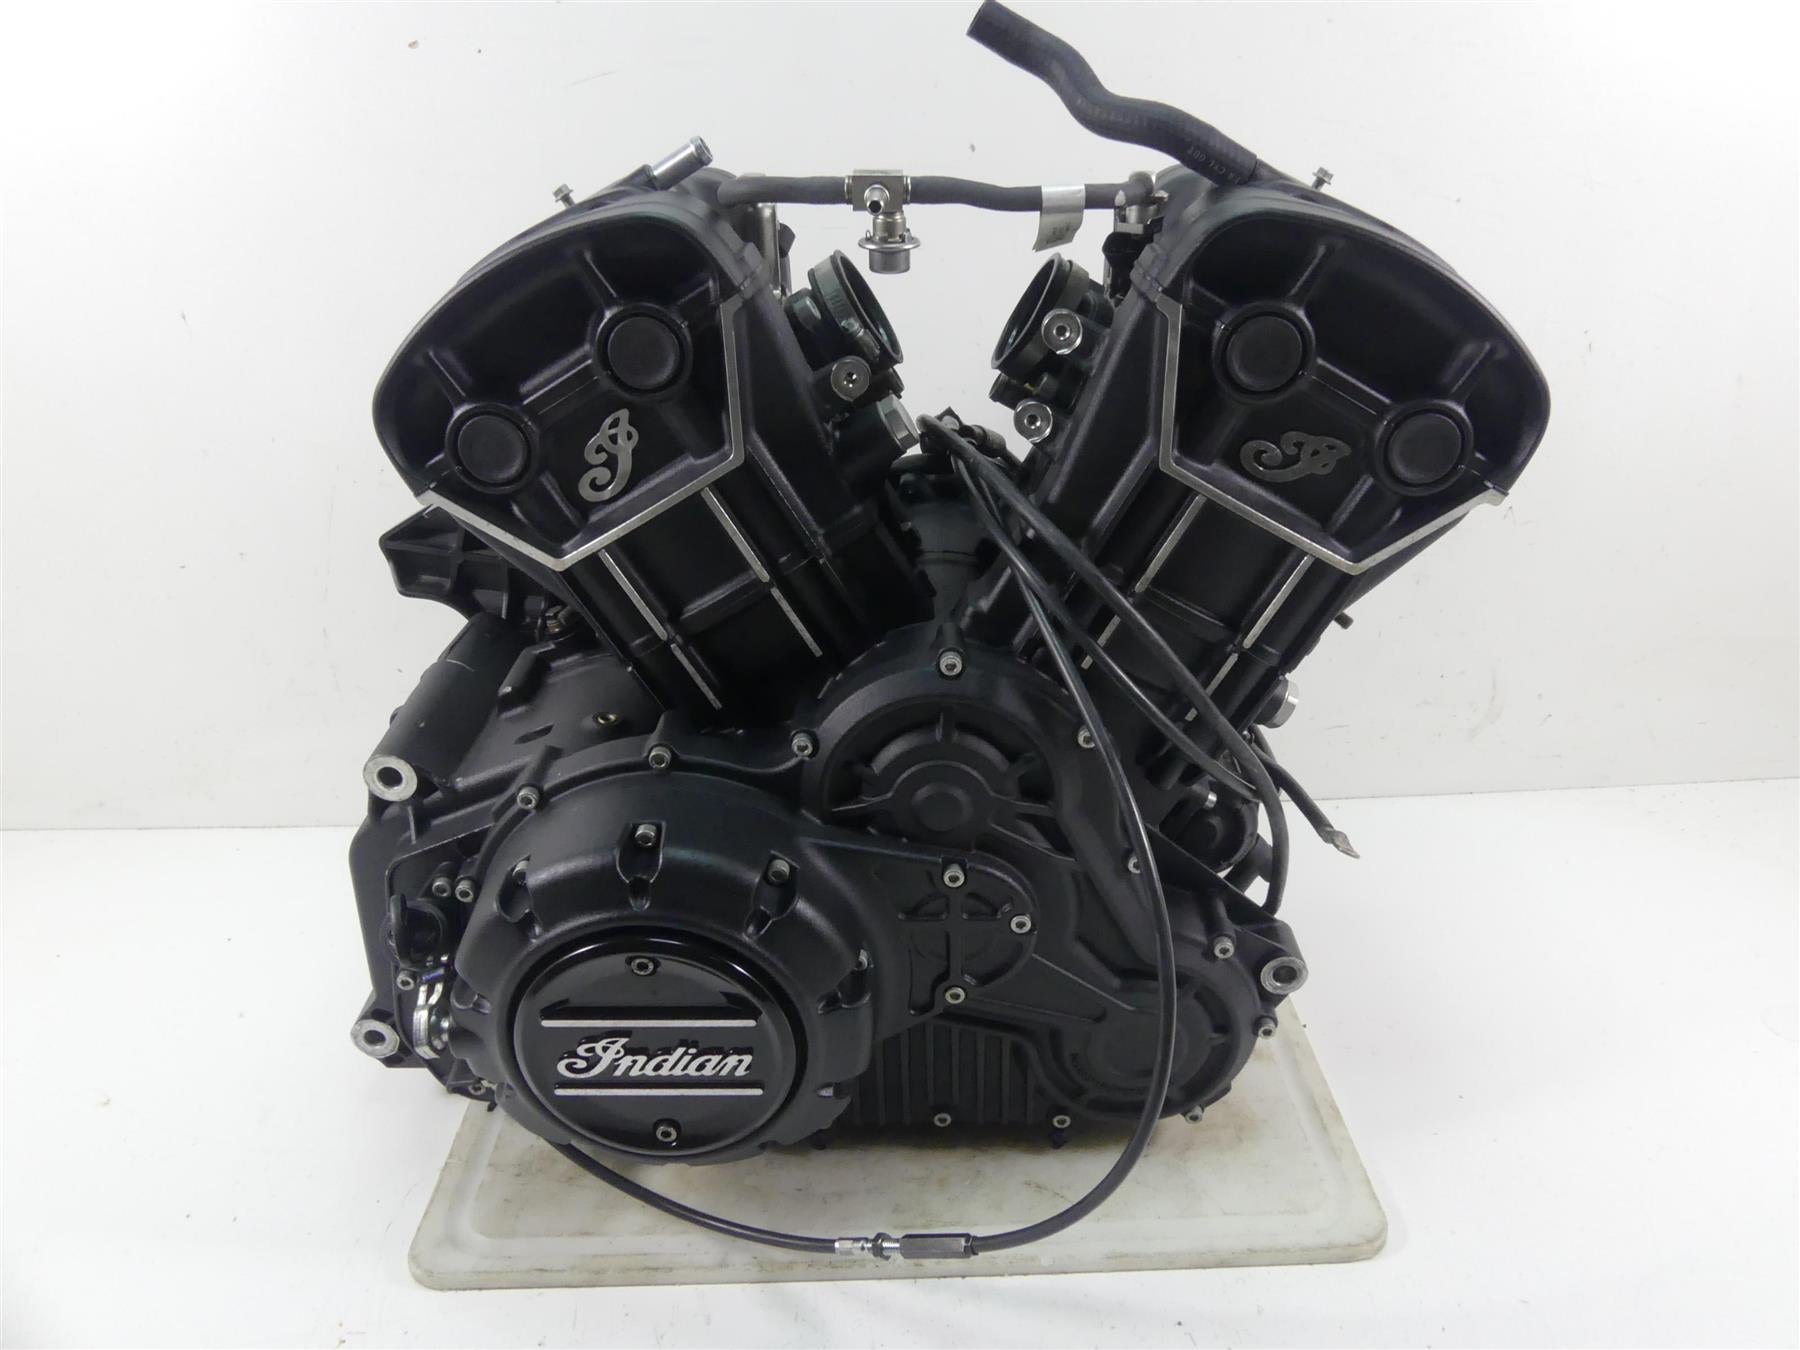 2016 Indian Scout Sixty Running Engine Motor 2k Only - Video 2208182 1205499 | Mototech271